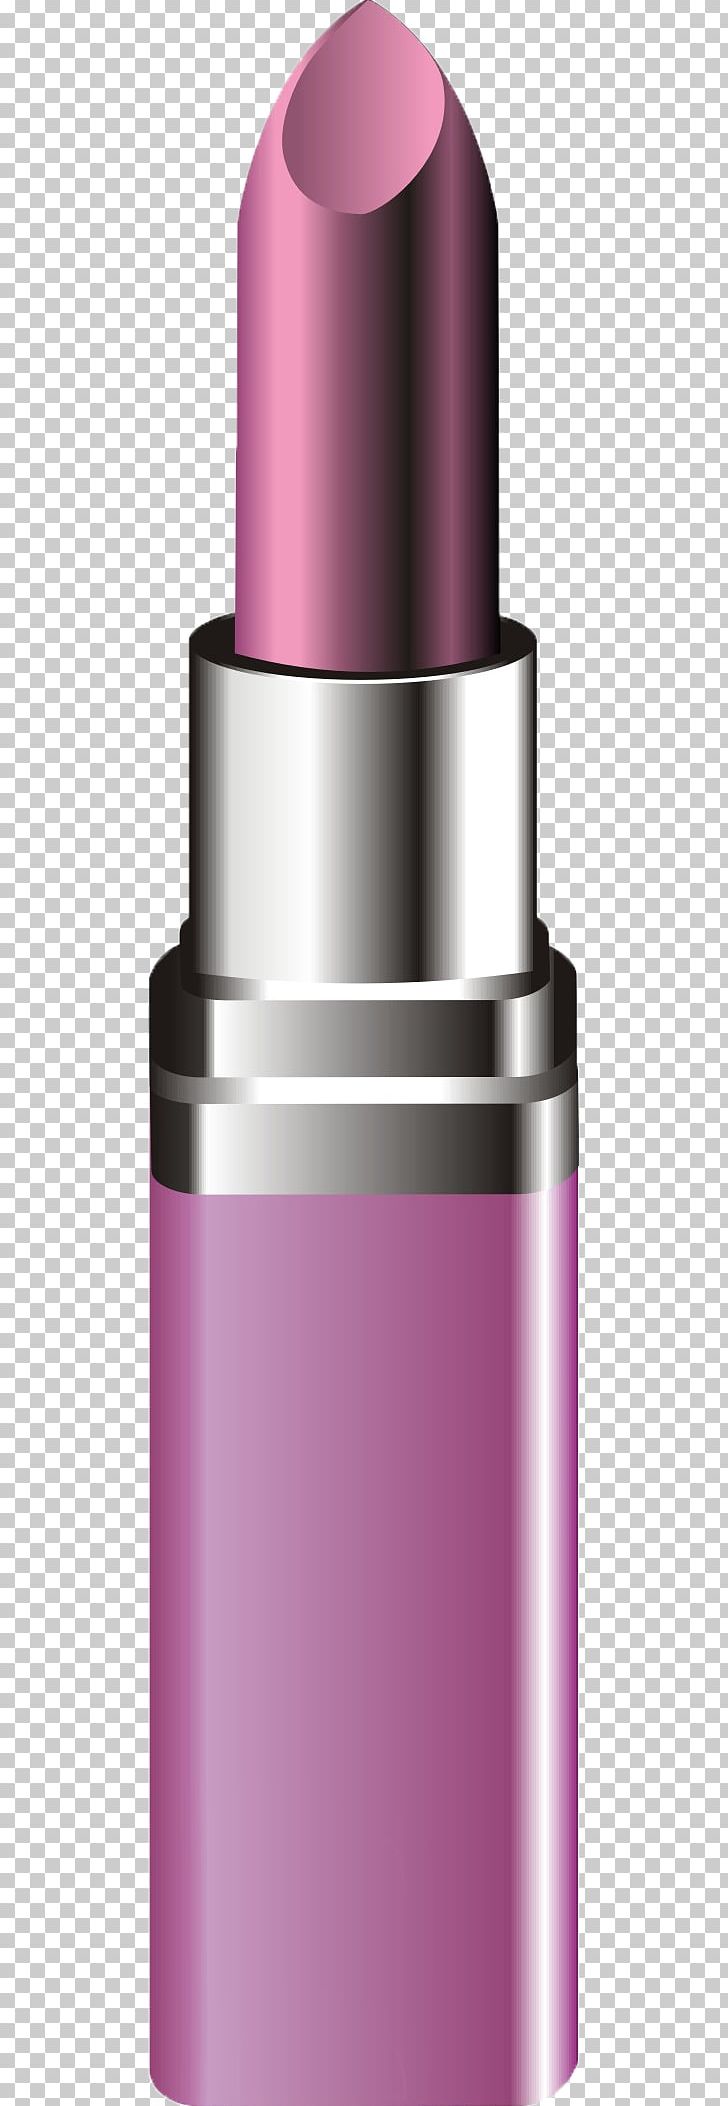 Lipstick Purple Make-up Cosmetics PNG, Clipart, Cosmetics, Download, Gratis, Health Beauty, Lipstick Free PNG Download